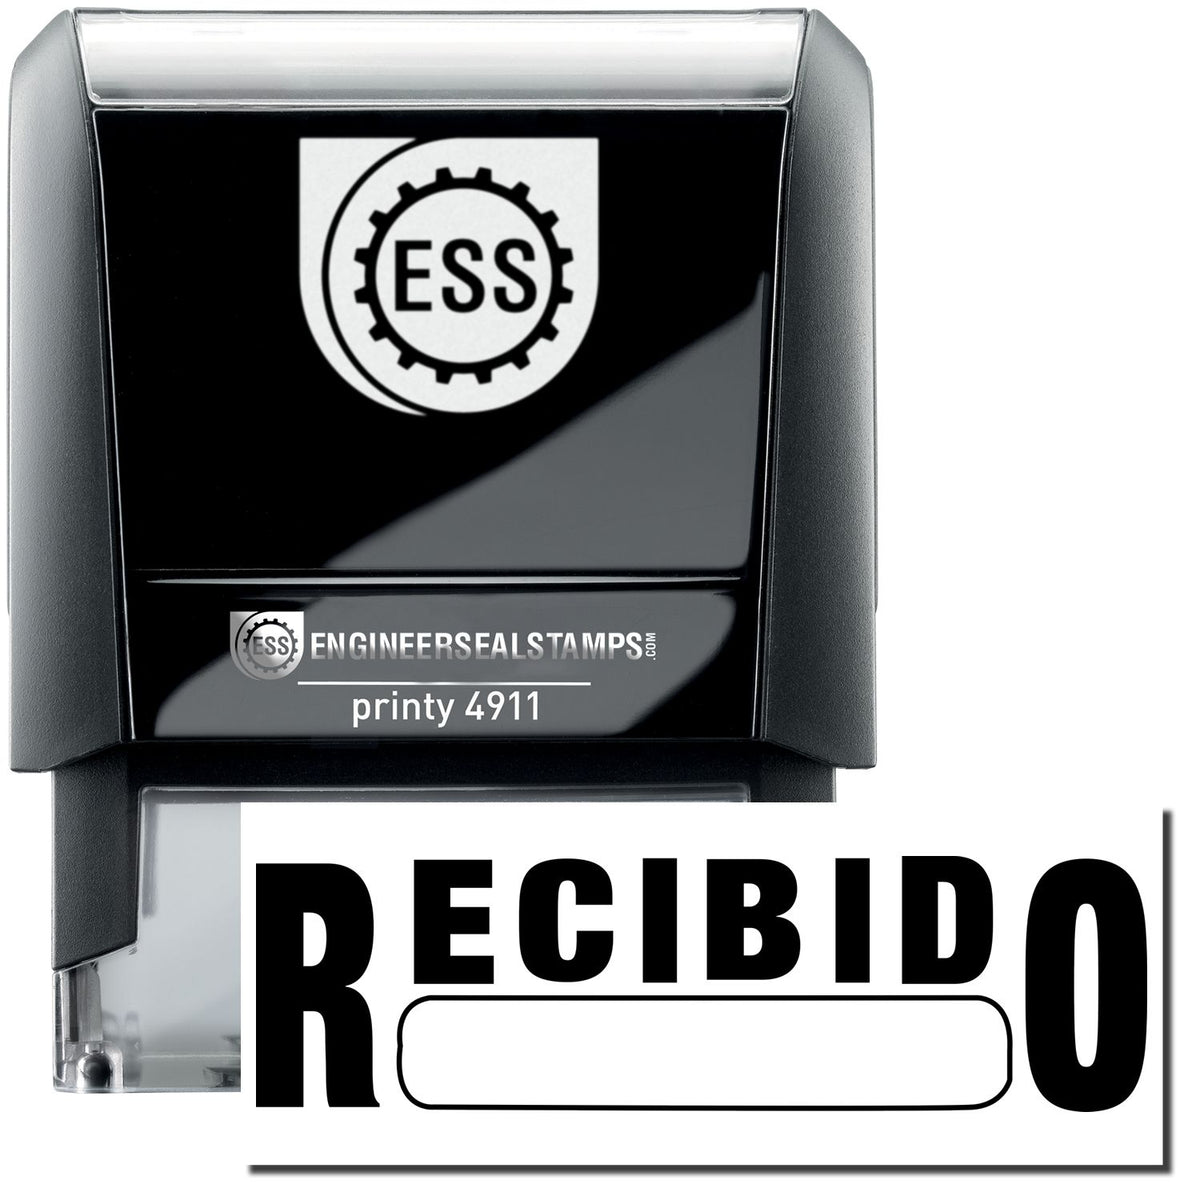 A self-inking stamp with a stamped image showing how the text &quot;RECIBIDO&quot; with a box under it is displayed after stamping.